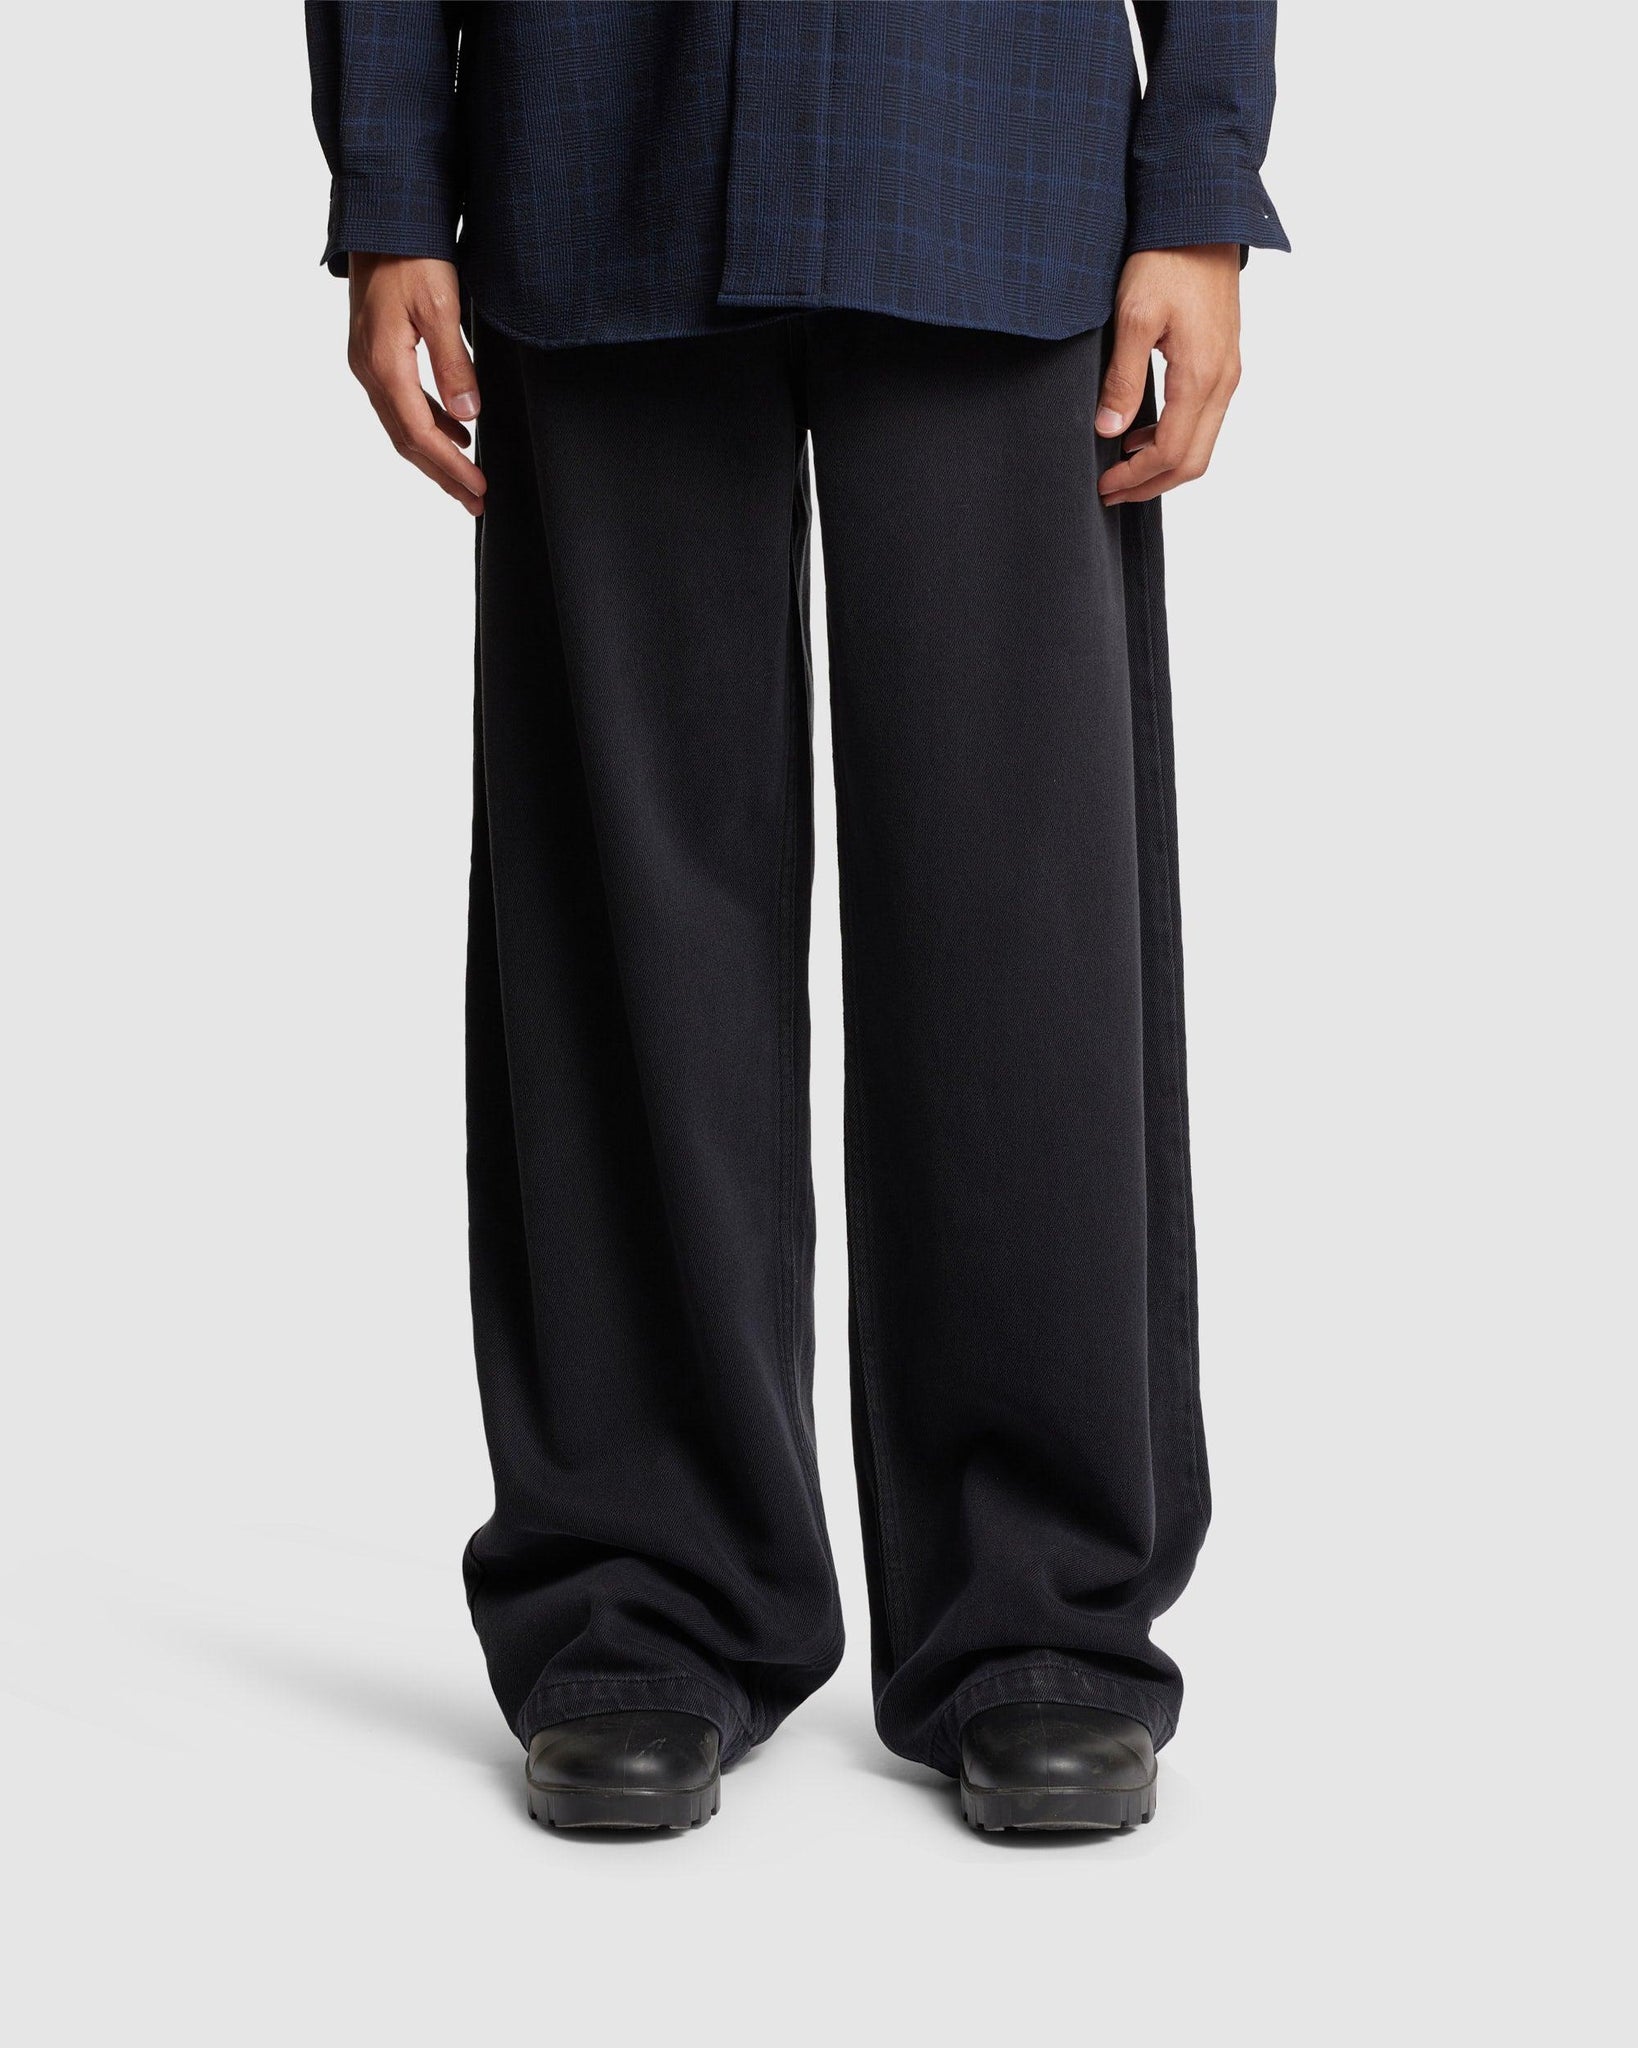 Keren Pants Faded Black - {{ collection.title }} - Chinatown Country Club 